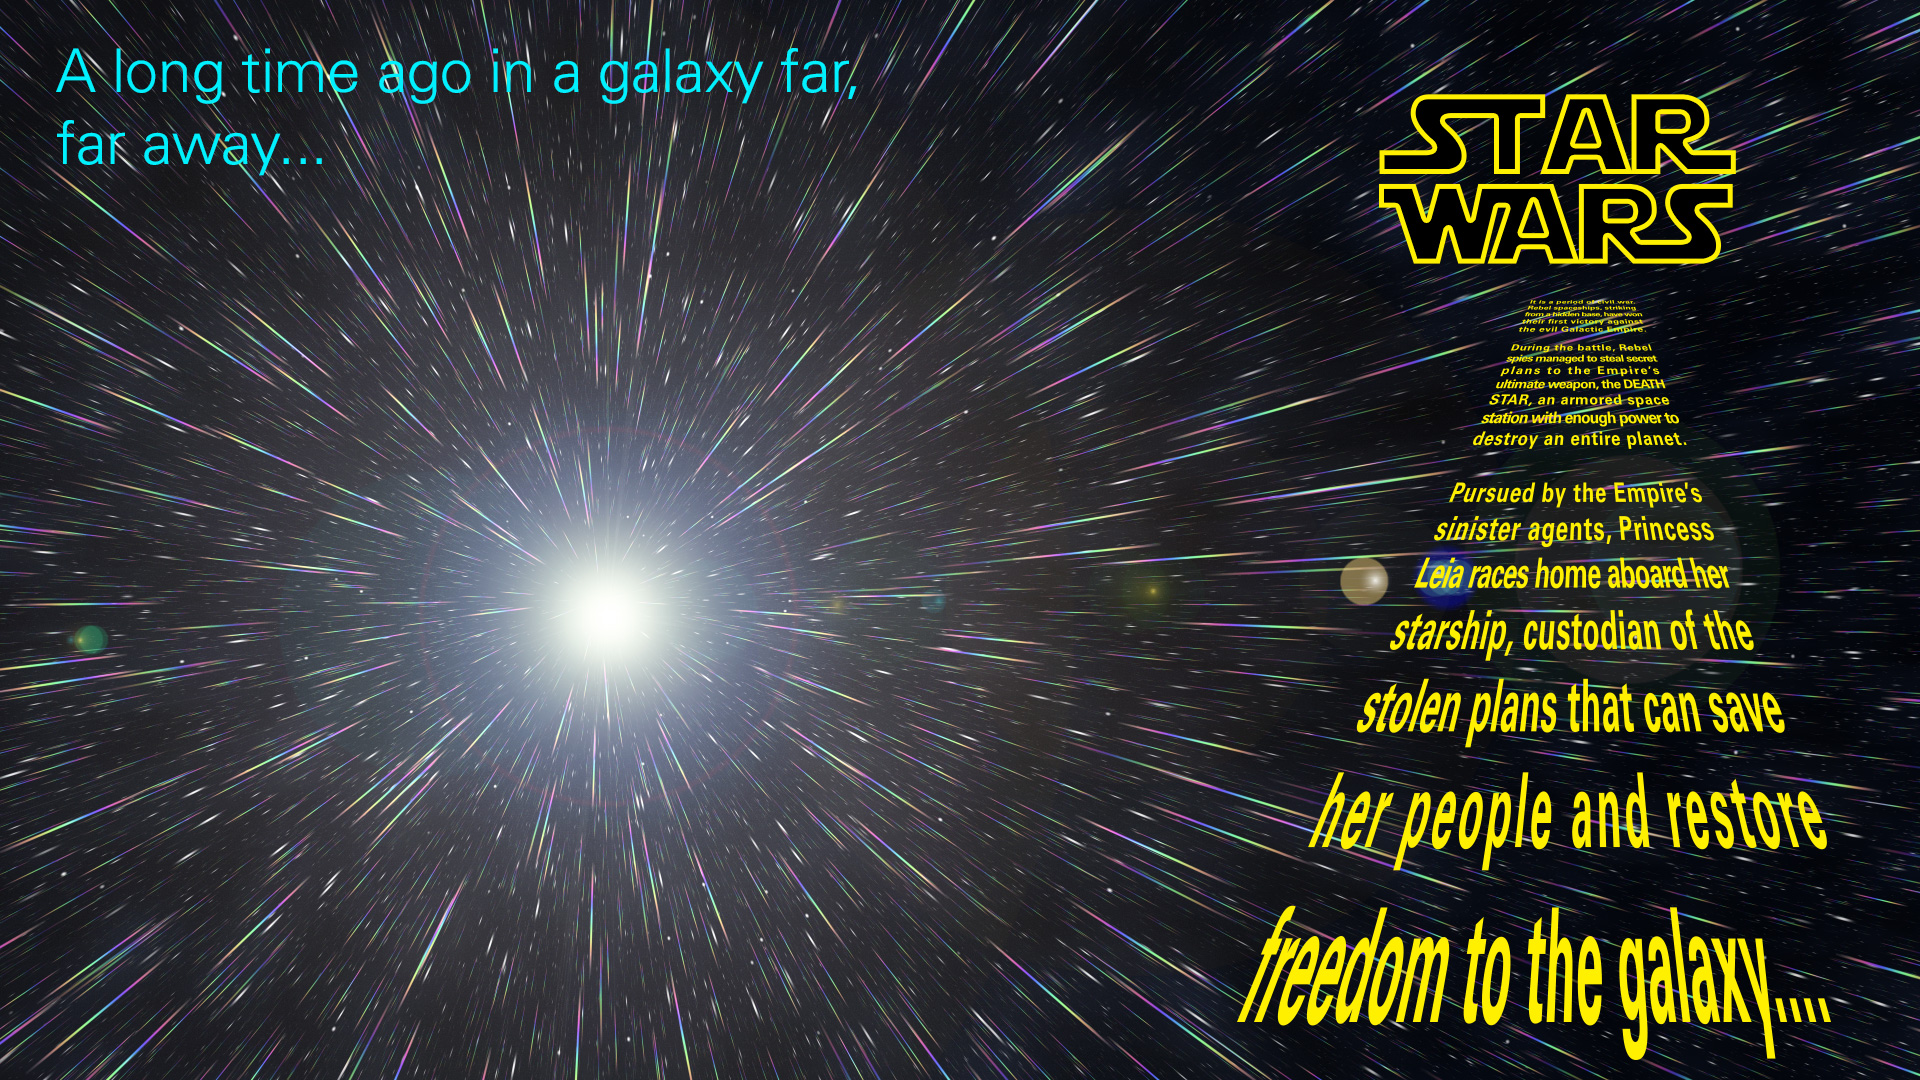 General 1920x1080 Star Wars A New Hope science fiction stars movies